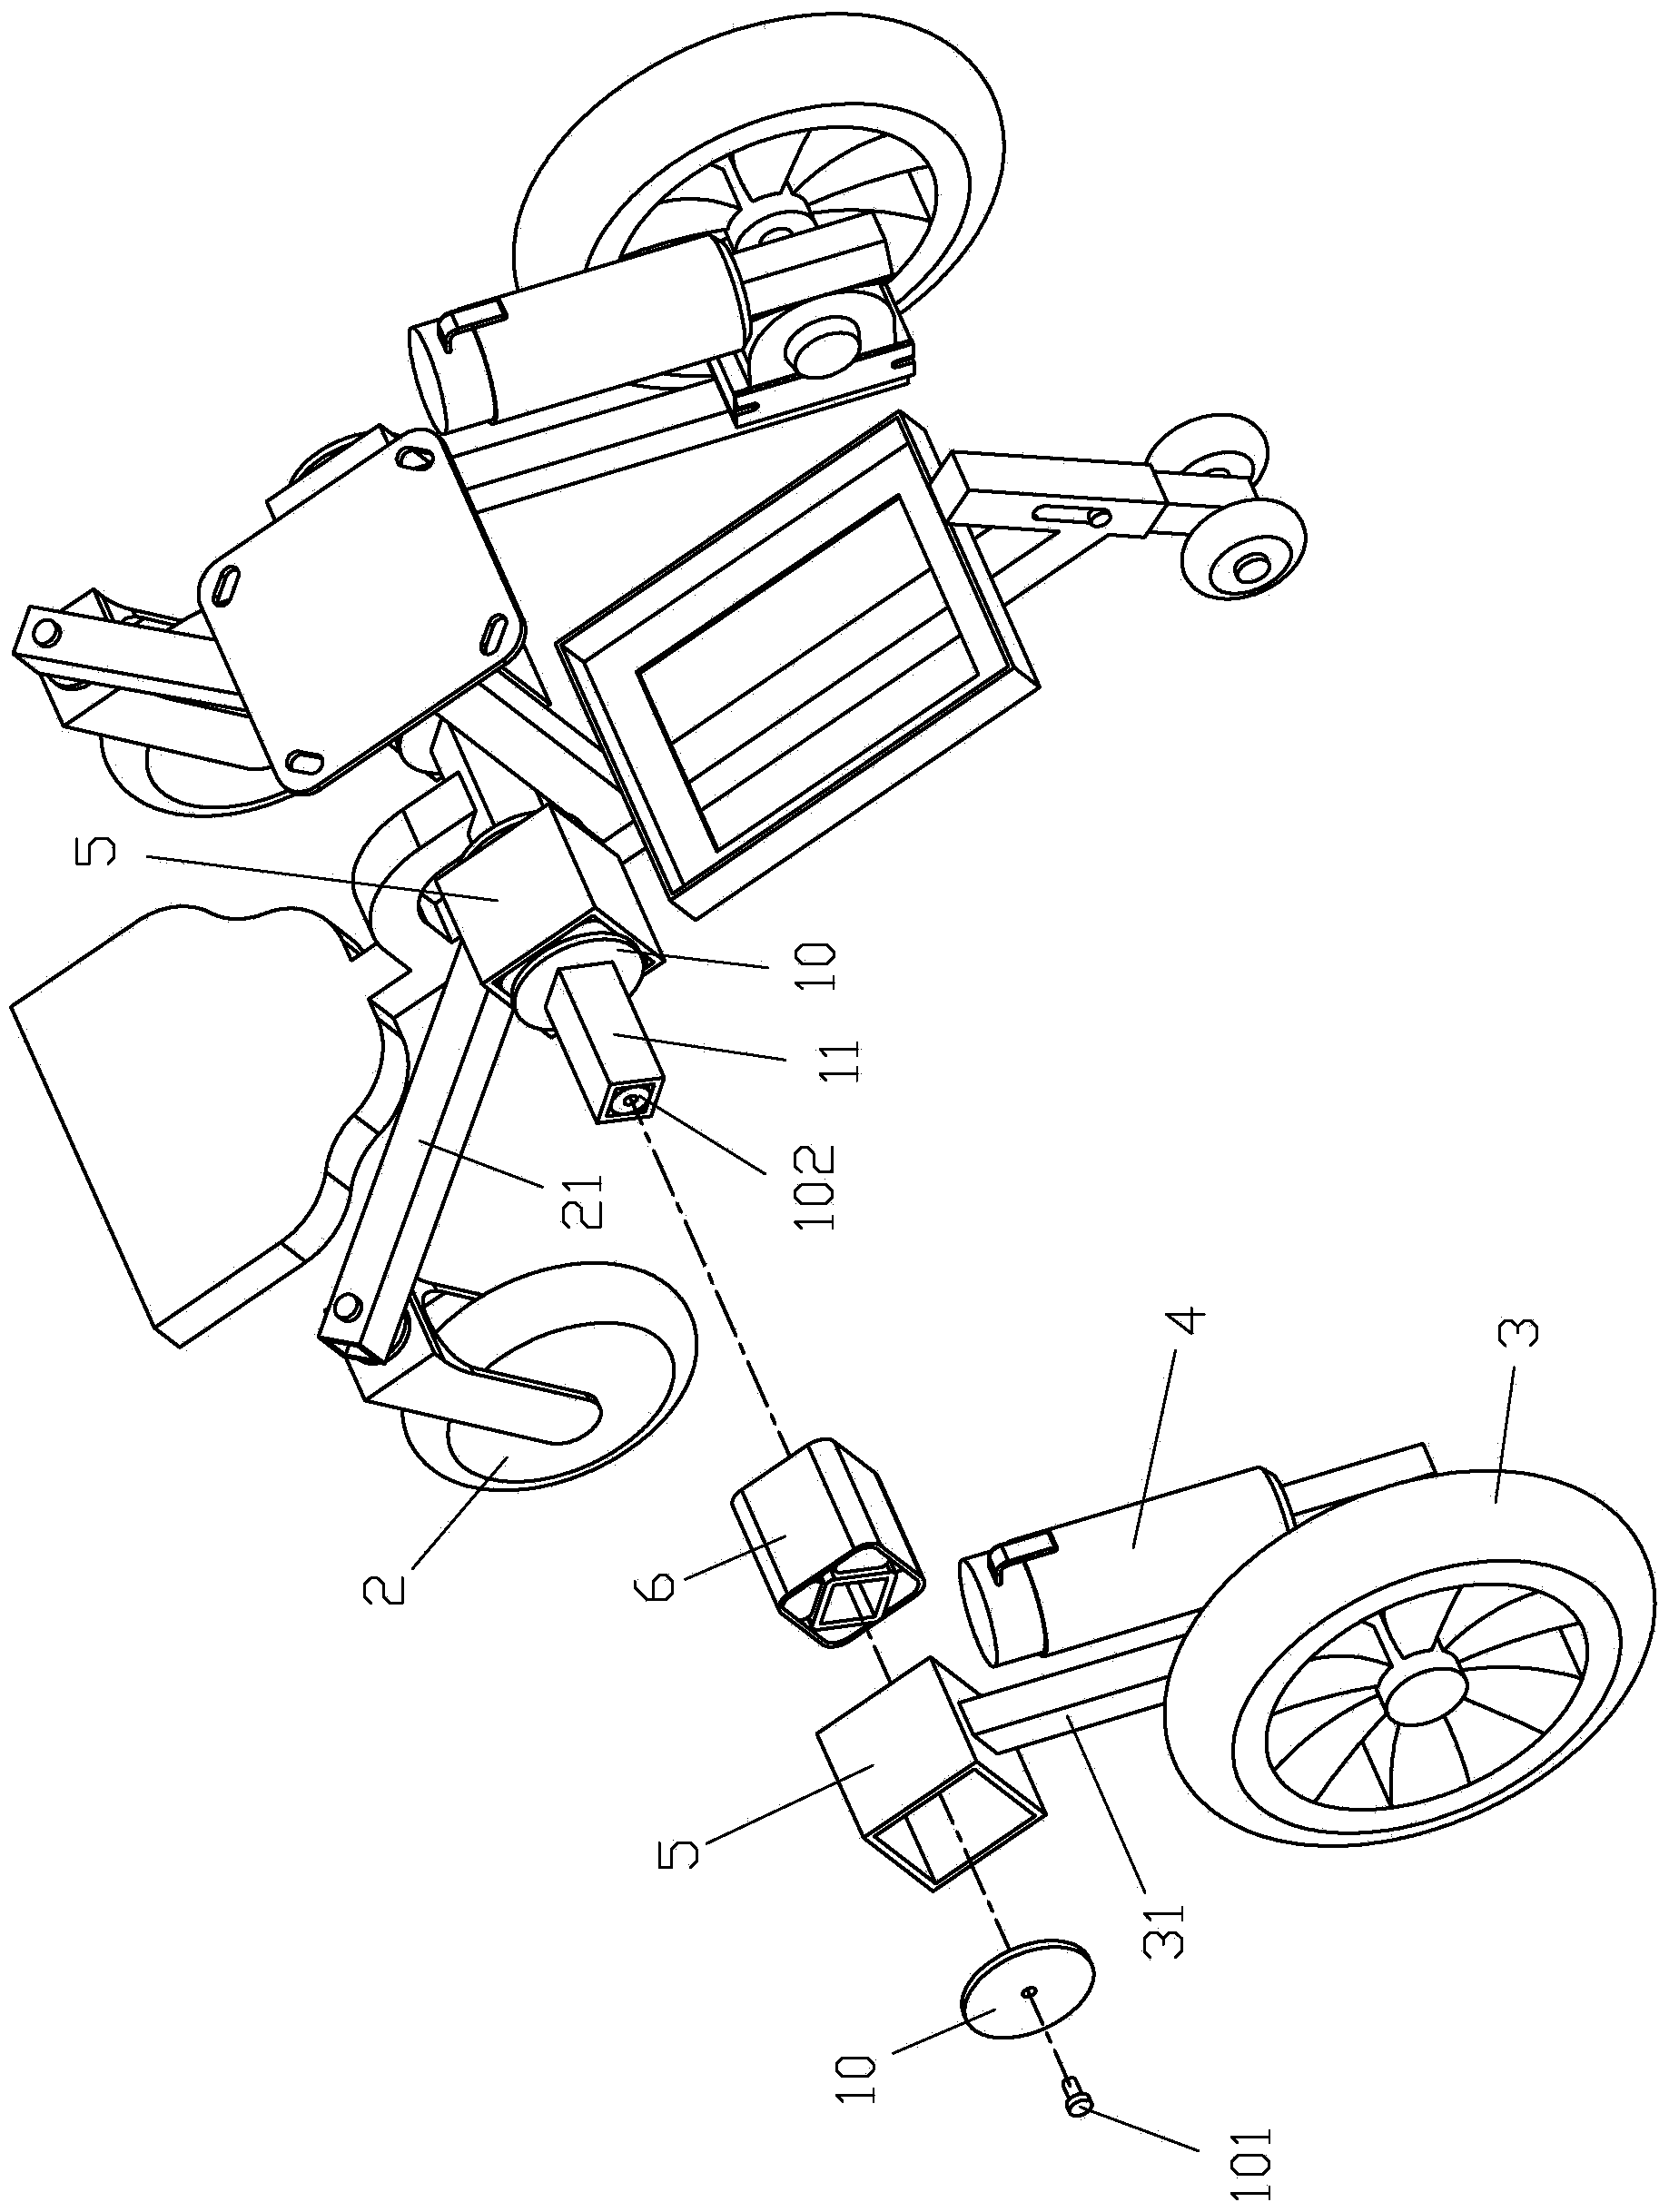 Four-wheel independent suspension system of power-driven wheelchairs